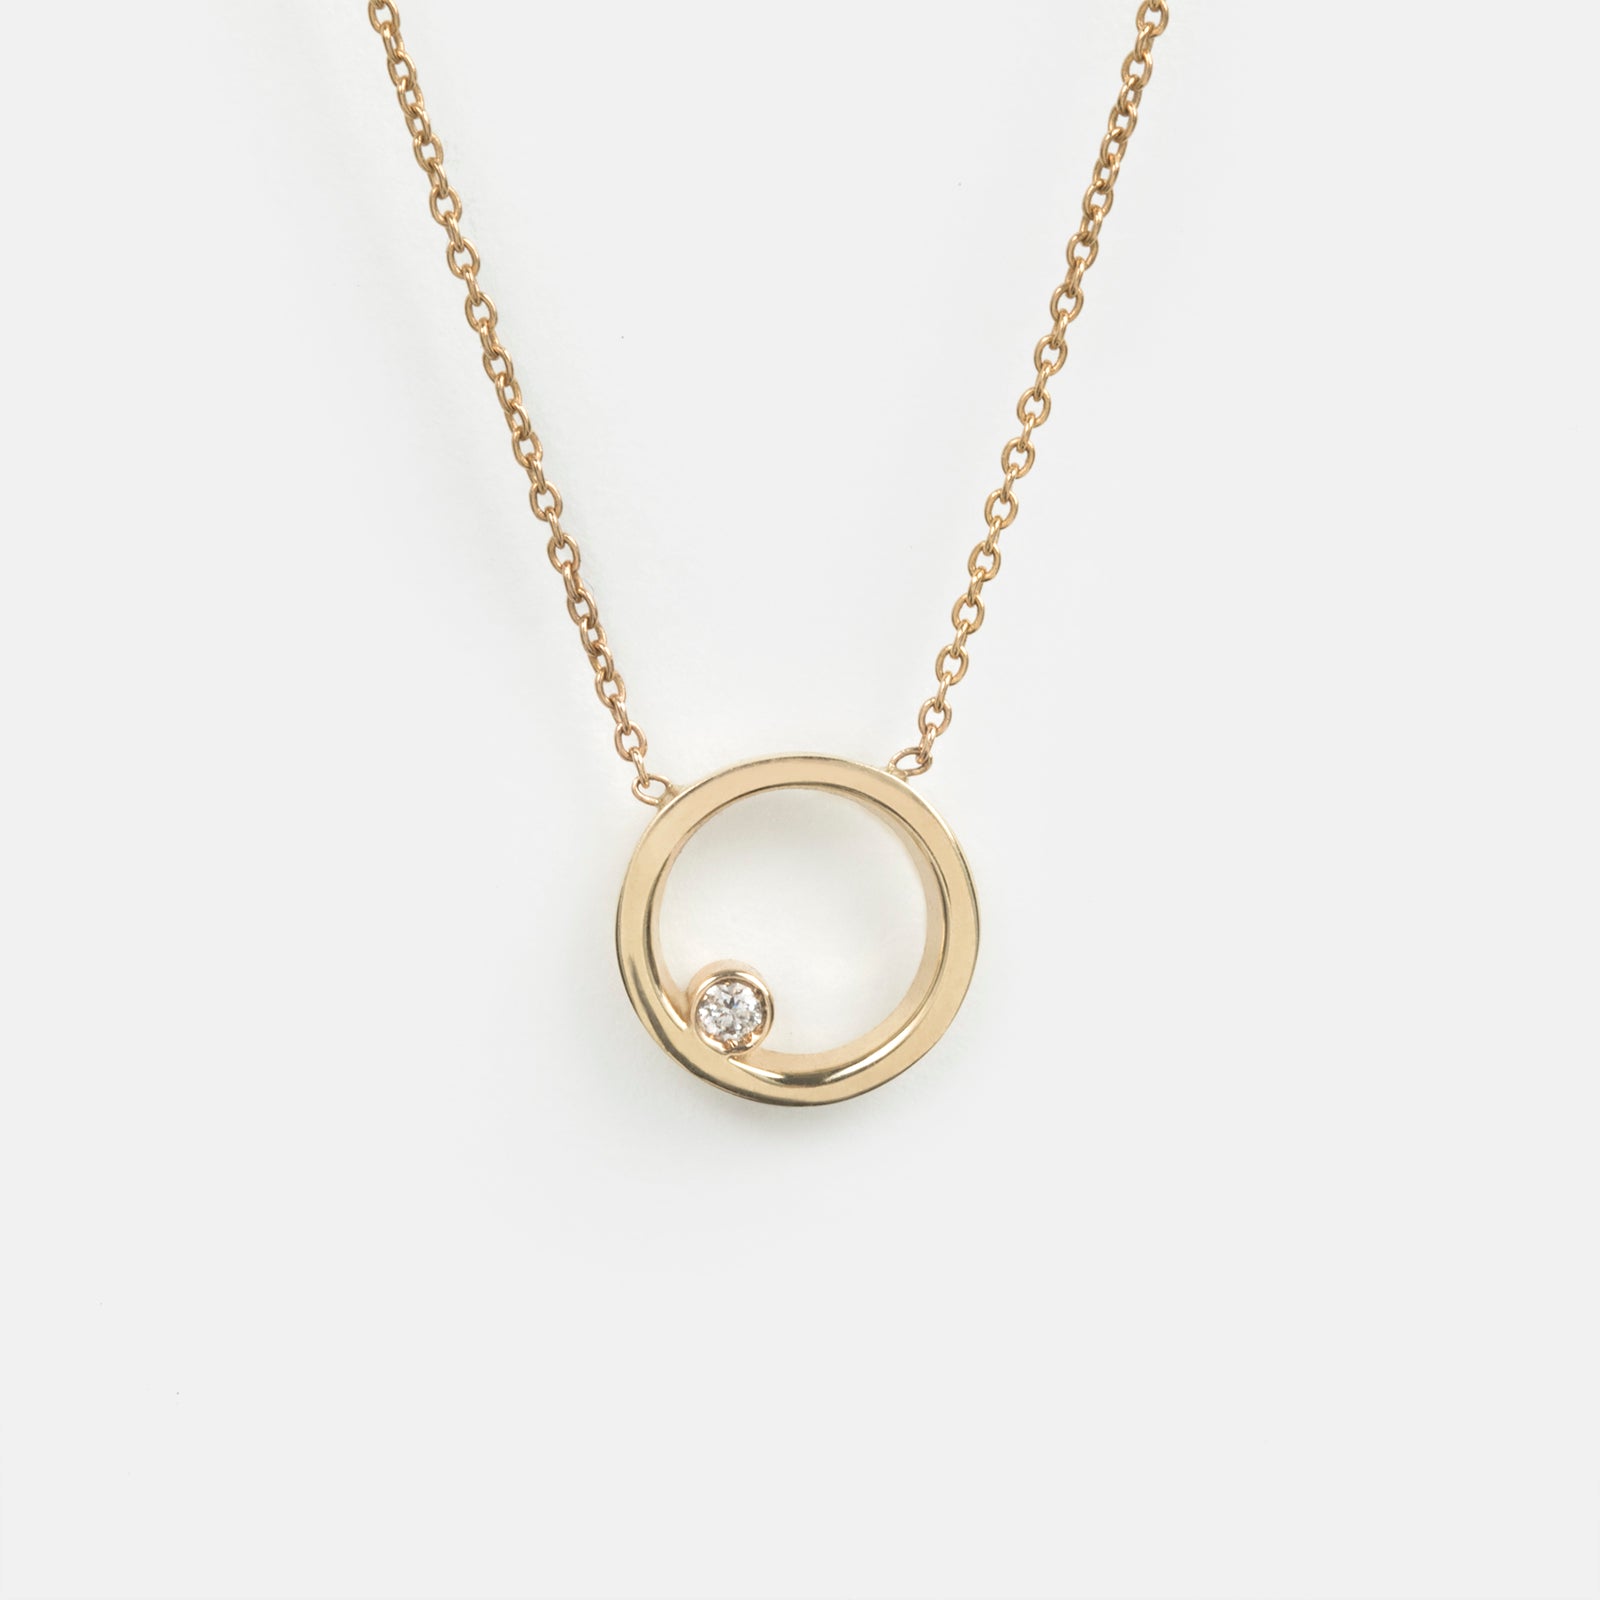 Ila Unconventional Necklace in 14k Gold set with White Diamond By SHW Fine Jewelry NYC